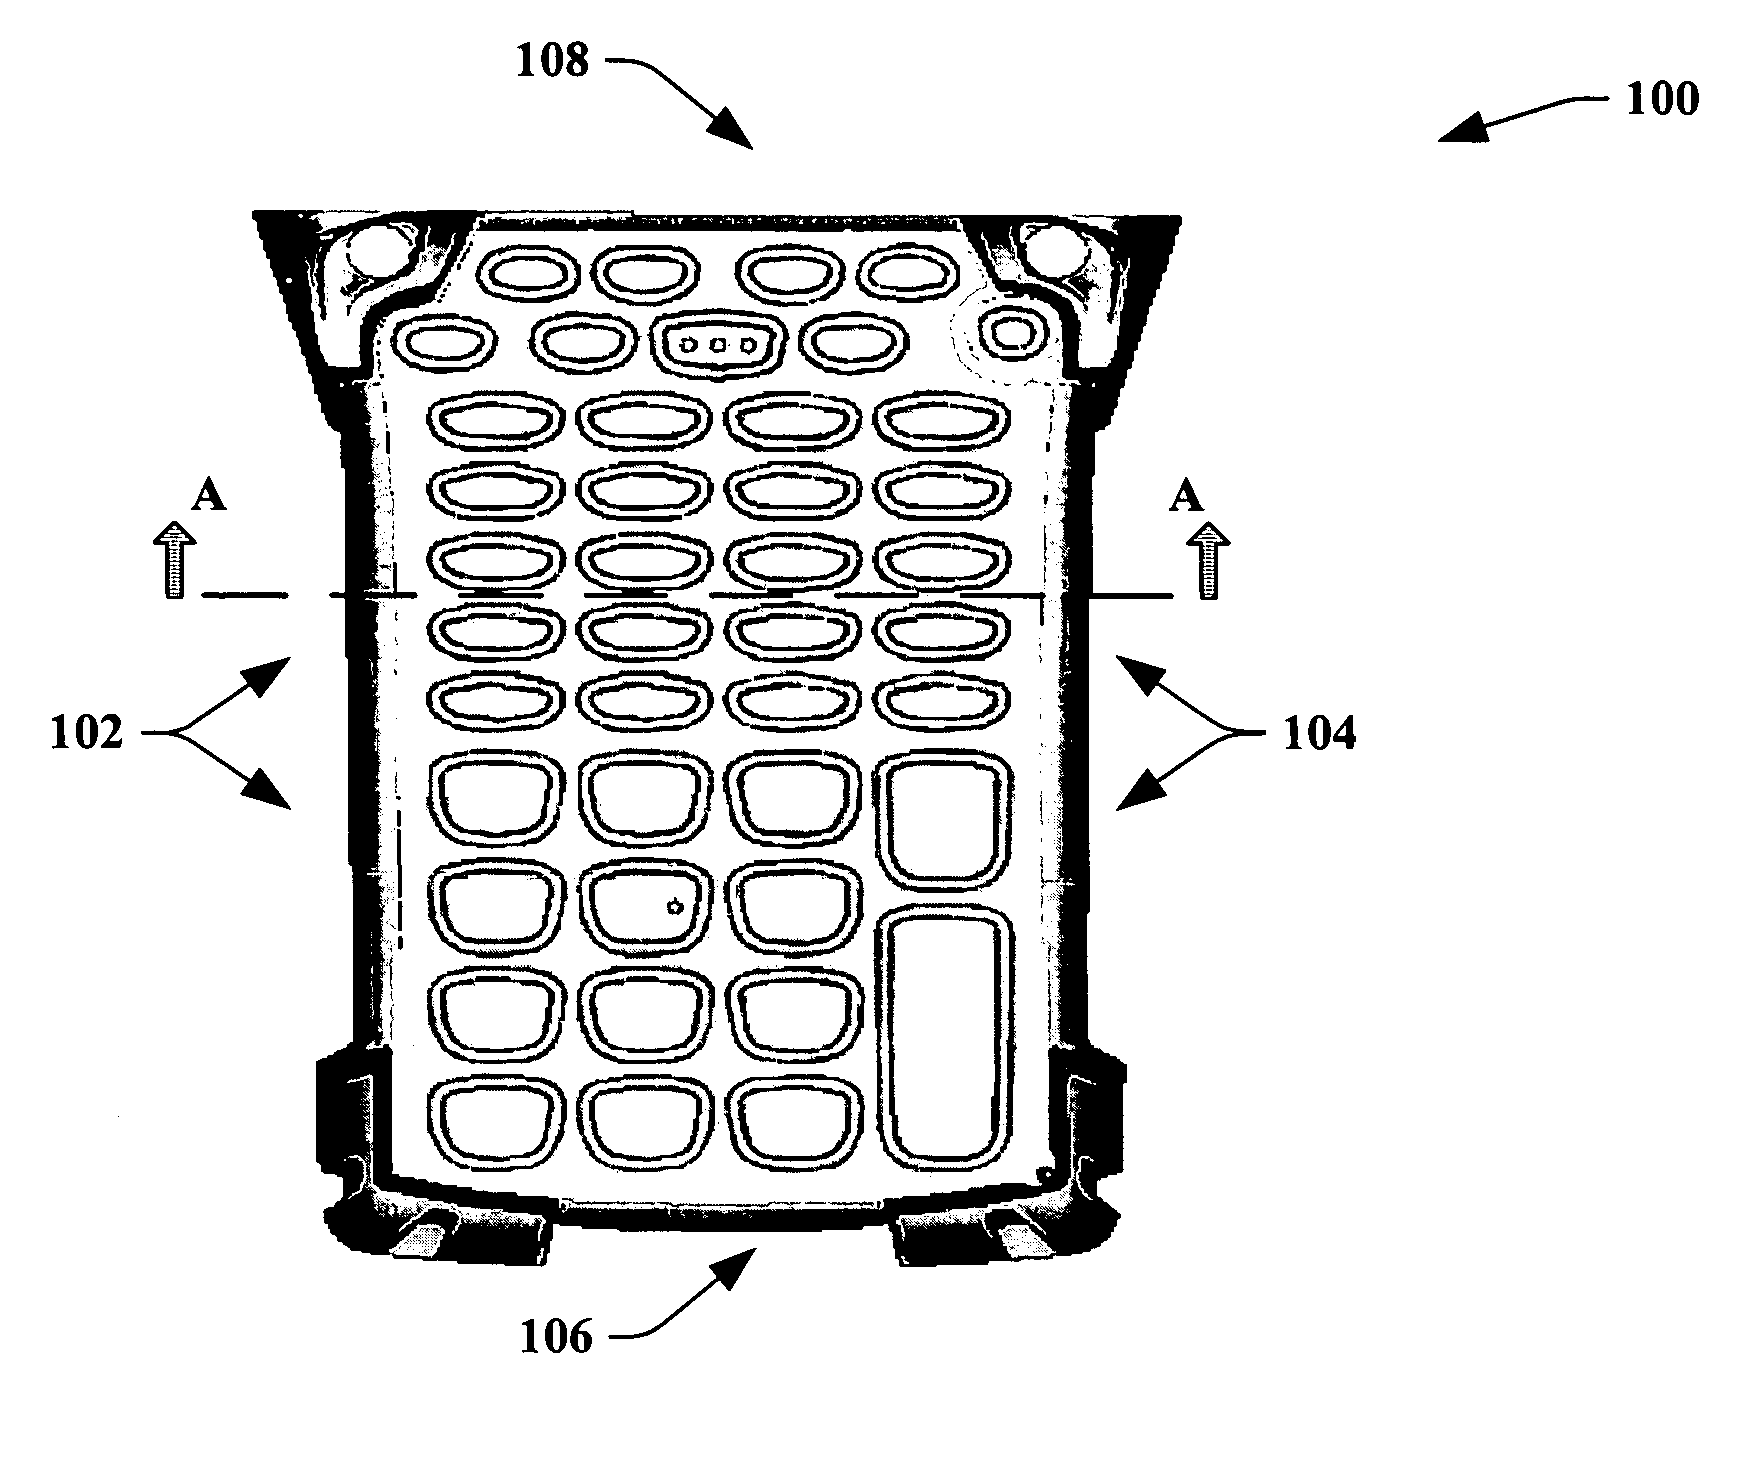 Self contained keypad assembly